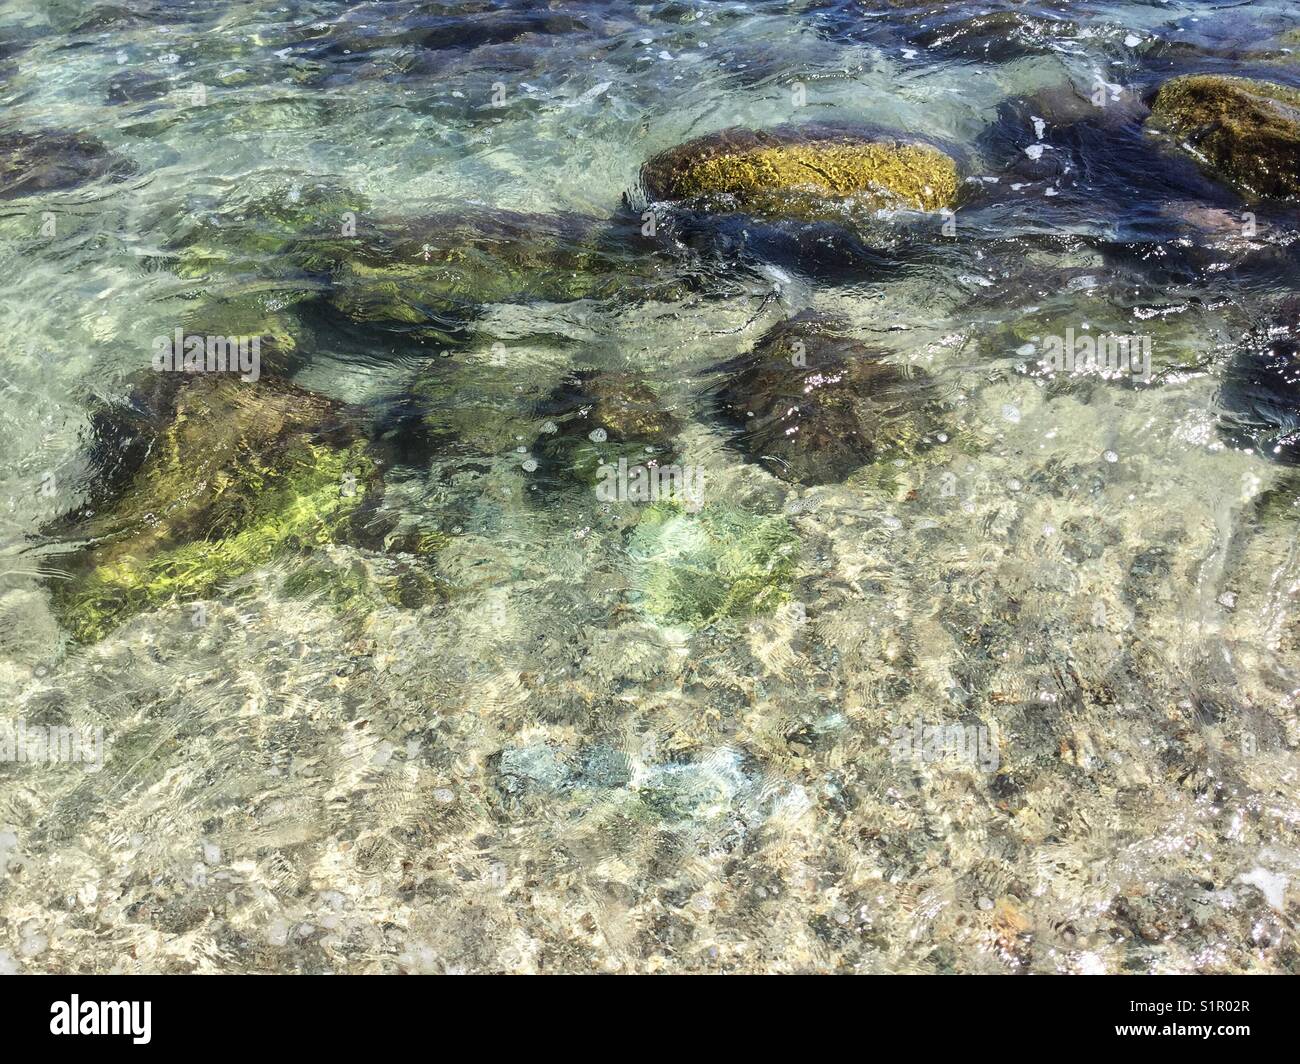 Crystal clear water - Sea of Cortez. Stock Photo